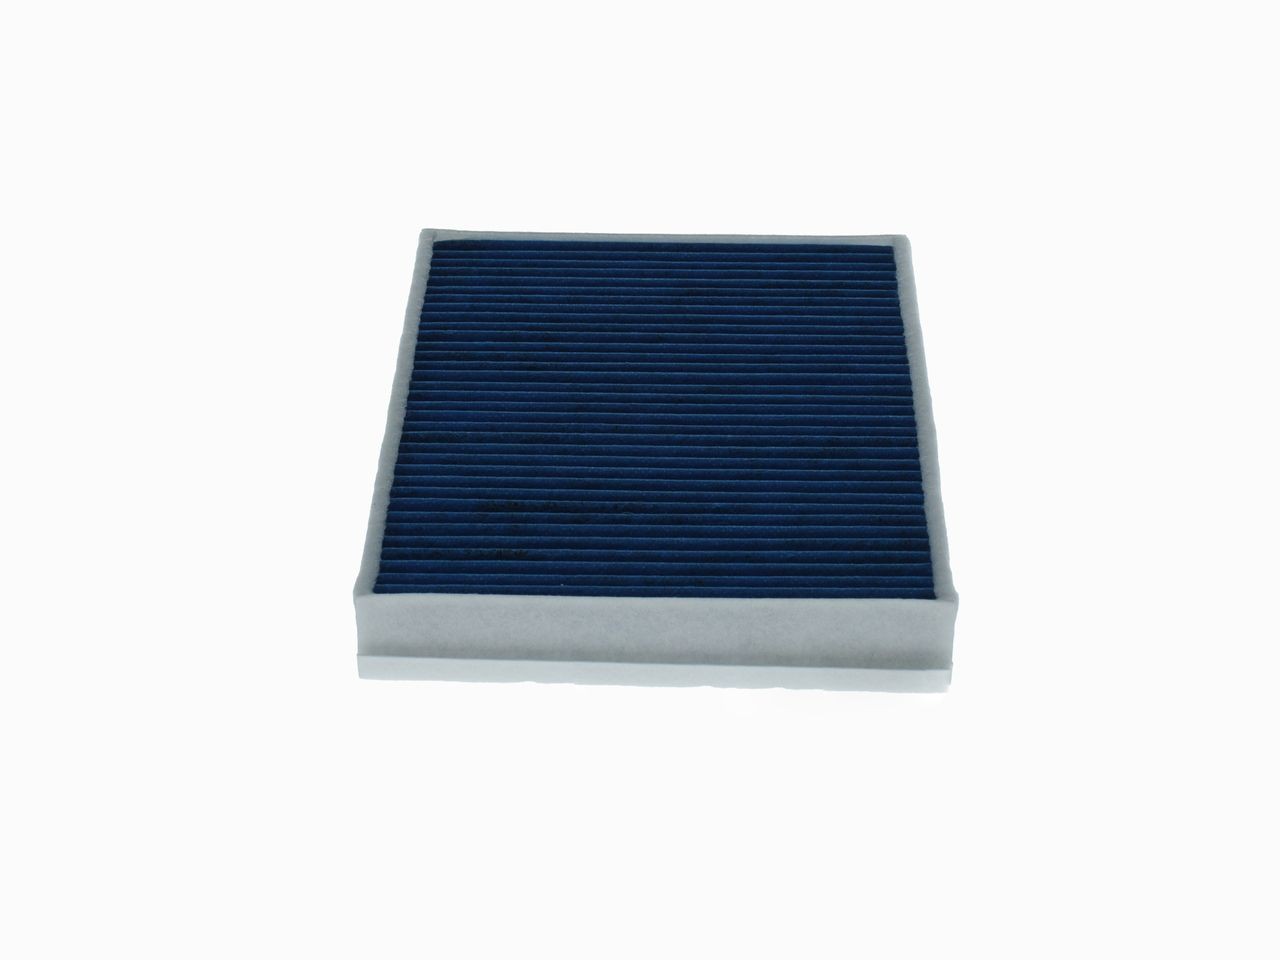 BOSCH 0986628661 Air conditioner filter Activated Carbon Filter, with antibacterial action, Particle Separation Rate >98% for 2.5µm (fine matter), with anti-allergic effect, with antiviral effect, with fungicidal effect, 276 mm x 194 mm x 31 mm